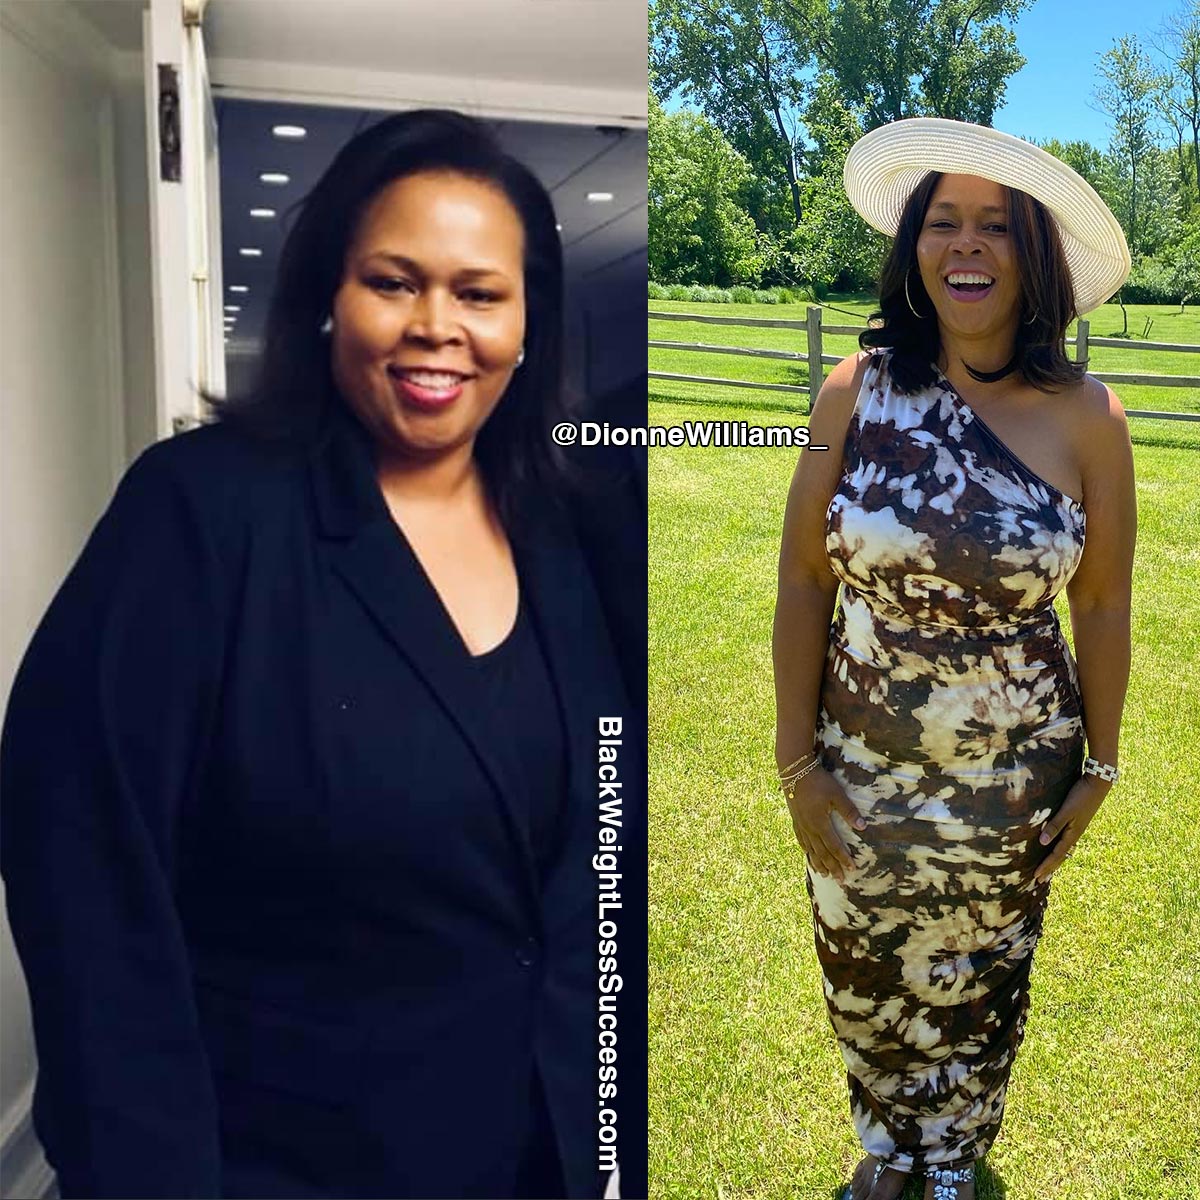 Dionne before and after weight loss